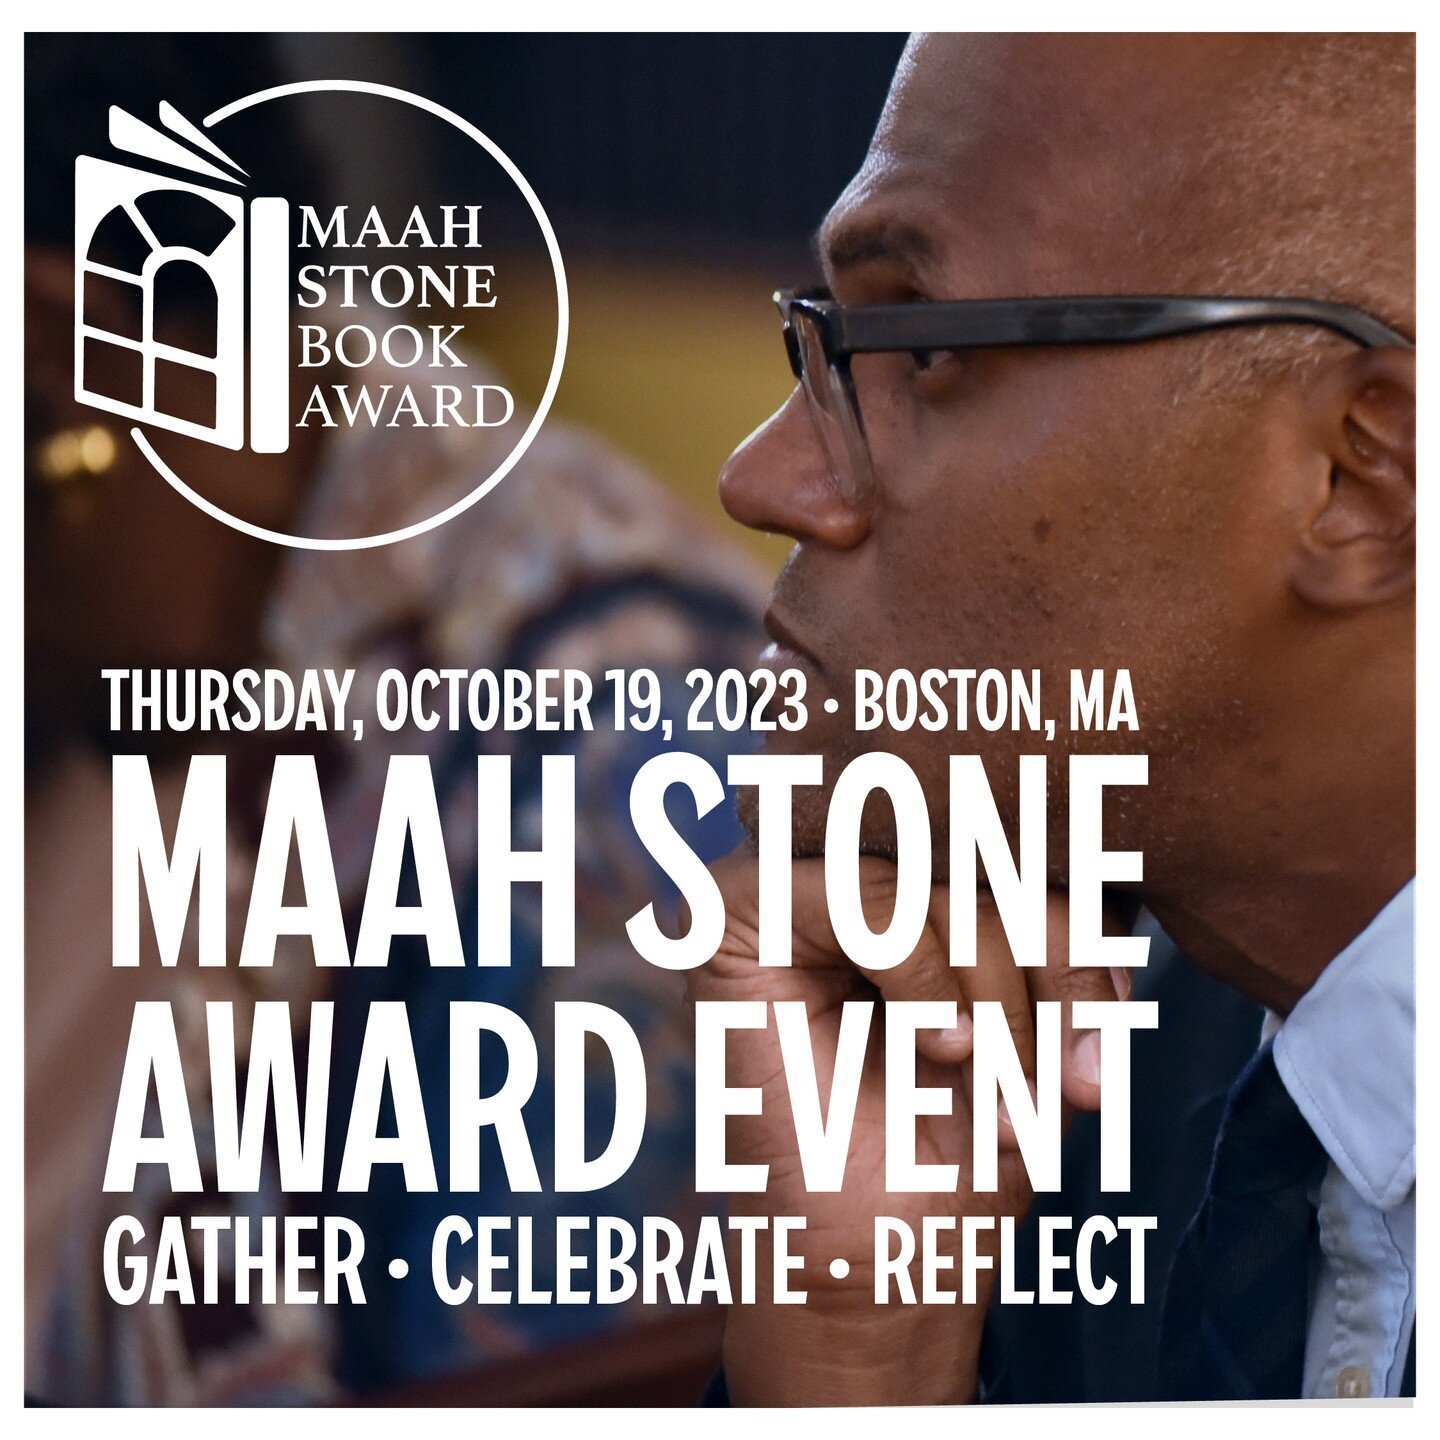 Cause for REFLECTion guaranteed! Join us in-person at the 2023 MAAH Stone Book Award Event on October 19th. Register today! (link in bio) Reception at the African Meeting House @ 5:30pm. Awards presentation (also live-streamed) at 6:30pm (ET). bit.ly